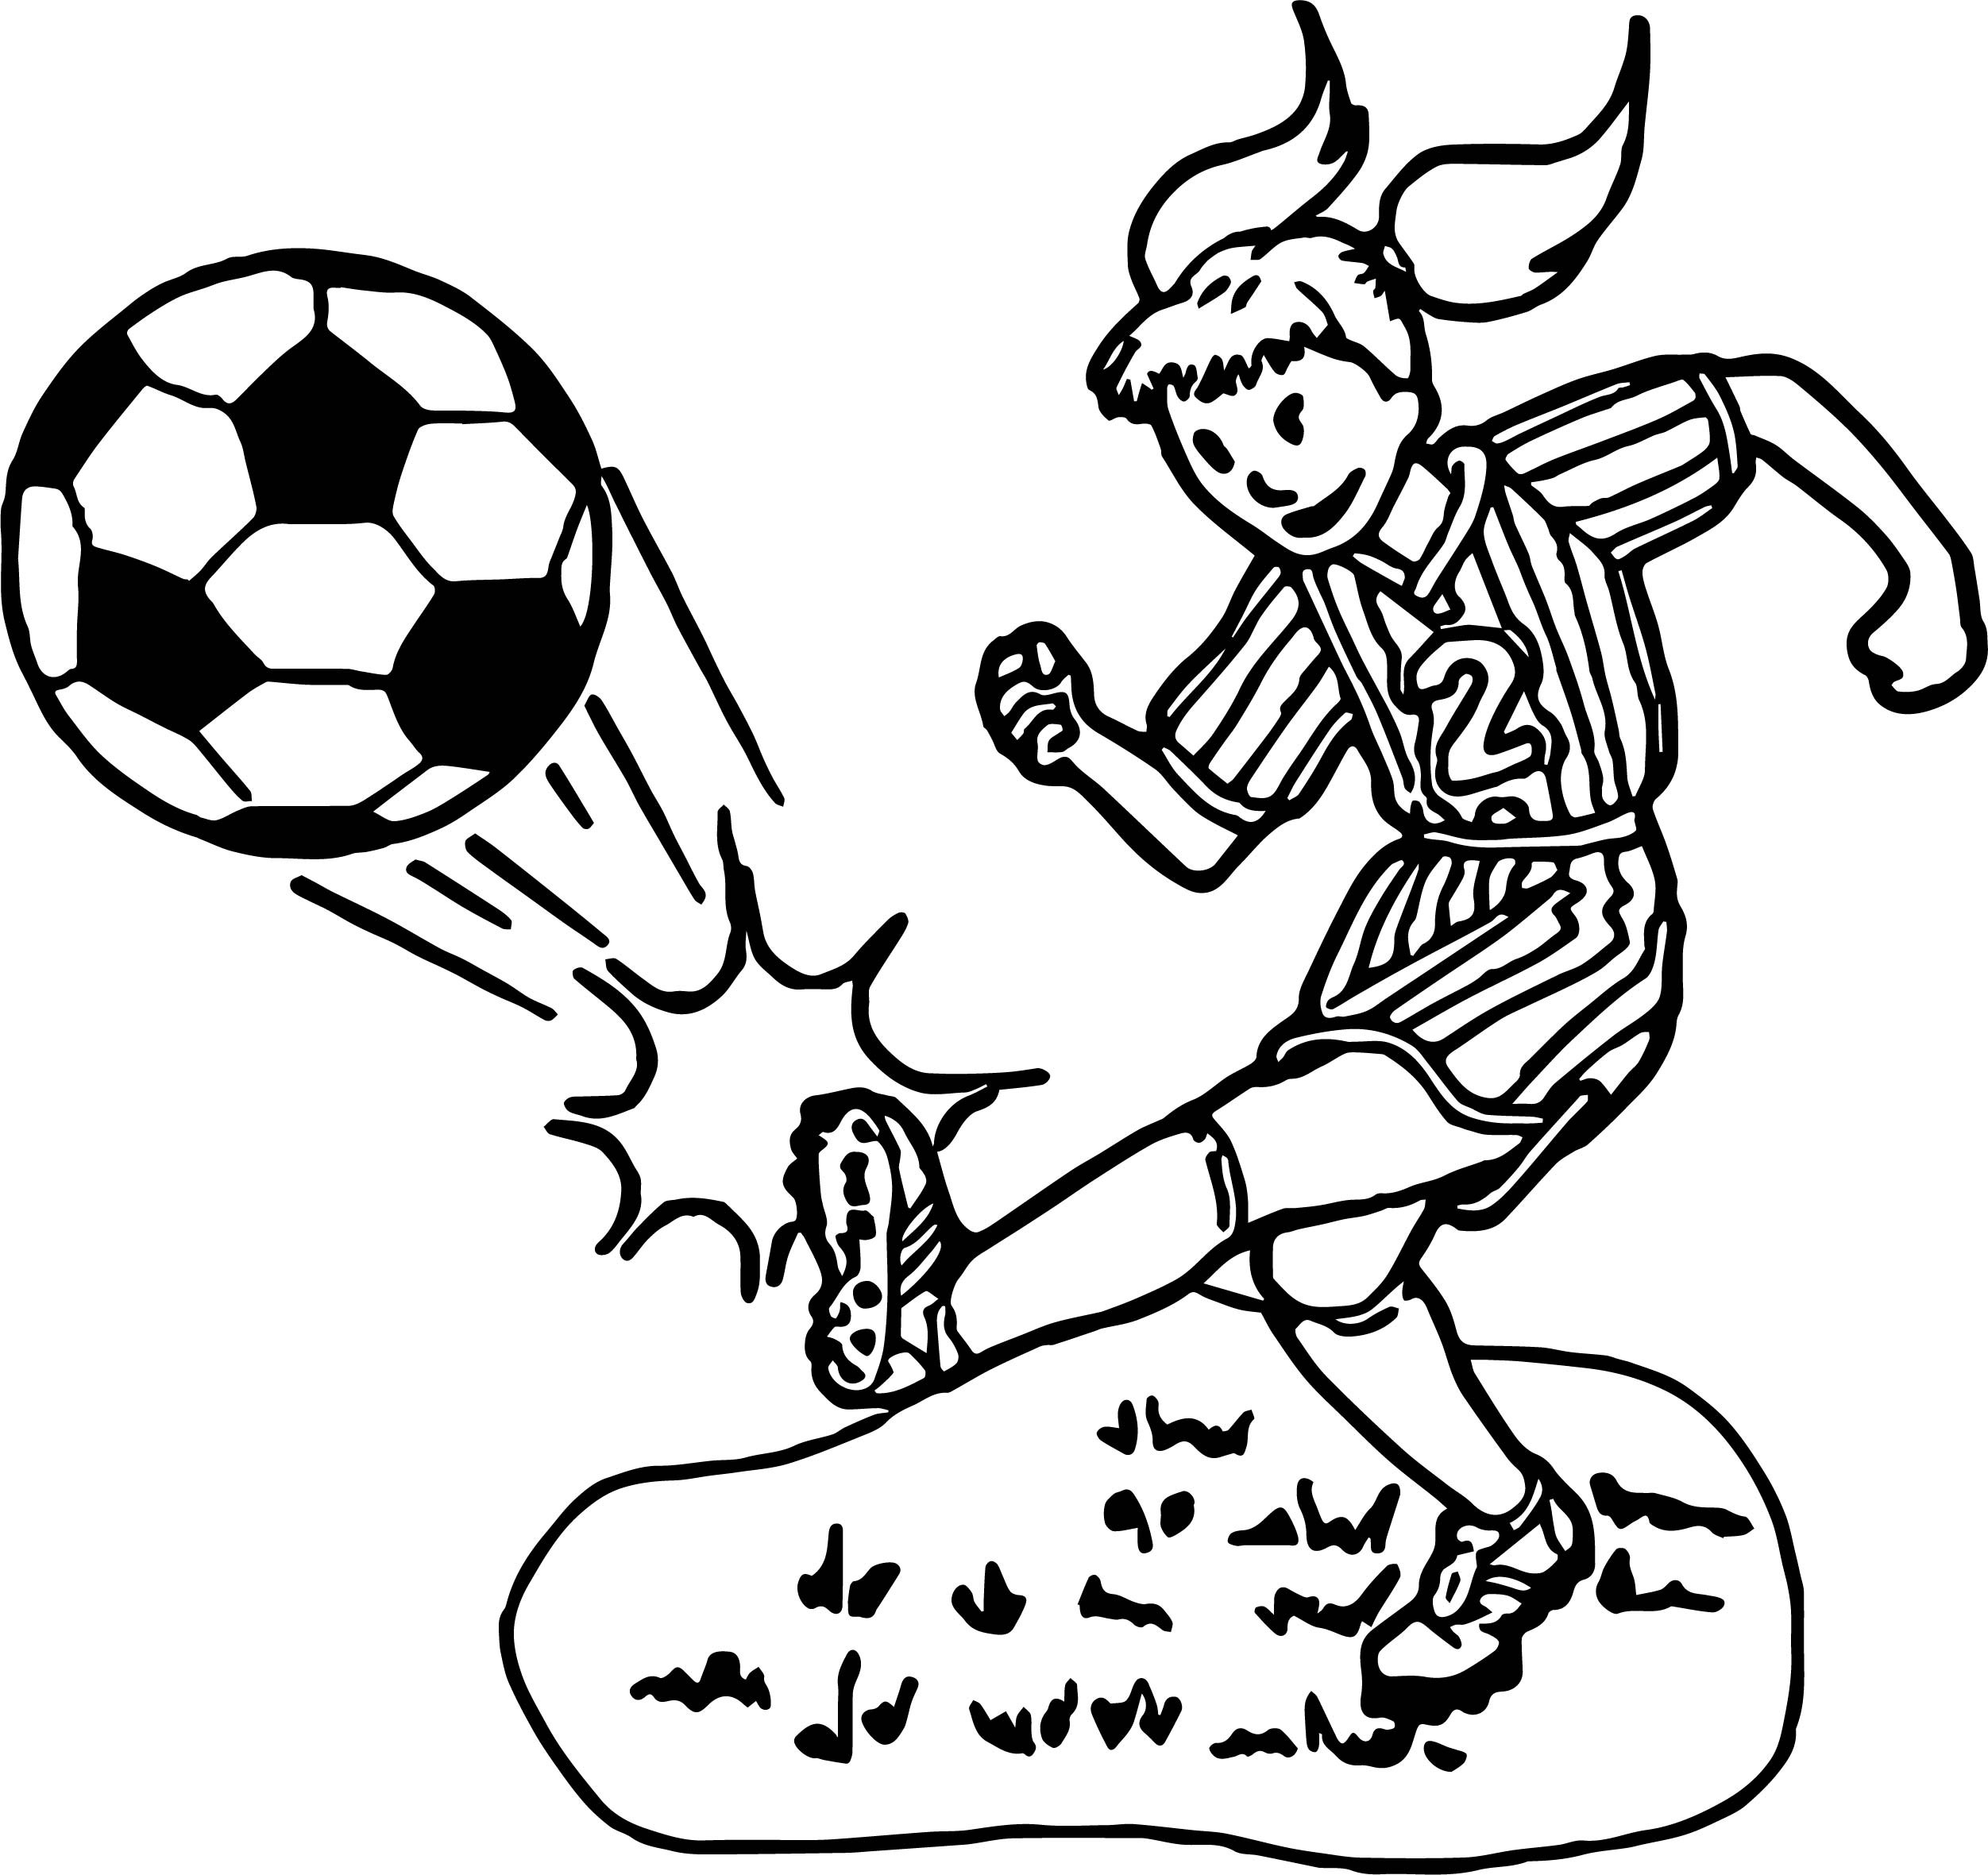 Soccer Girls Coloring Pages
 Kid Girl Playing Soccer Playing Football Coloring Page